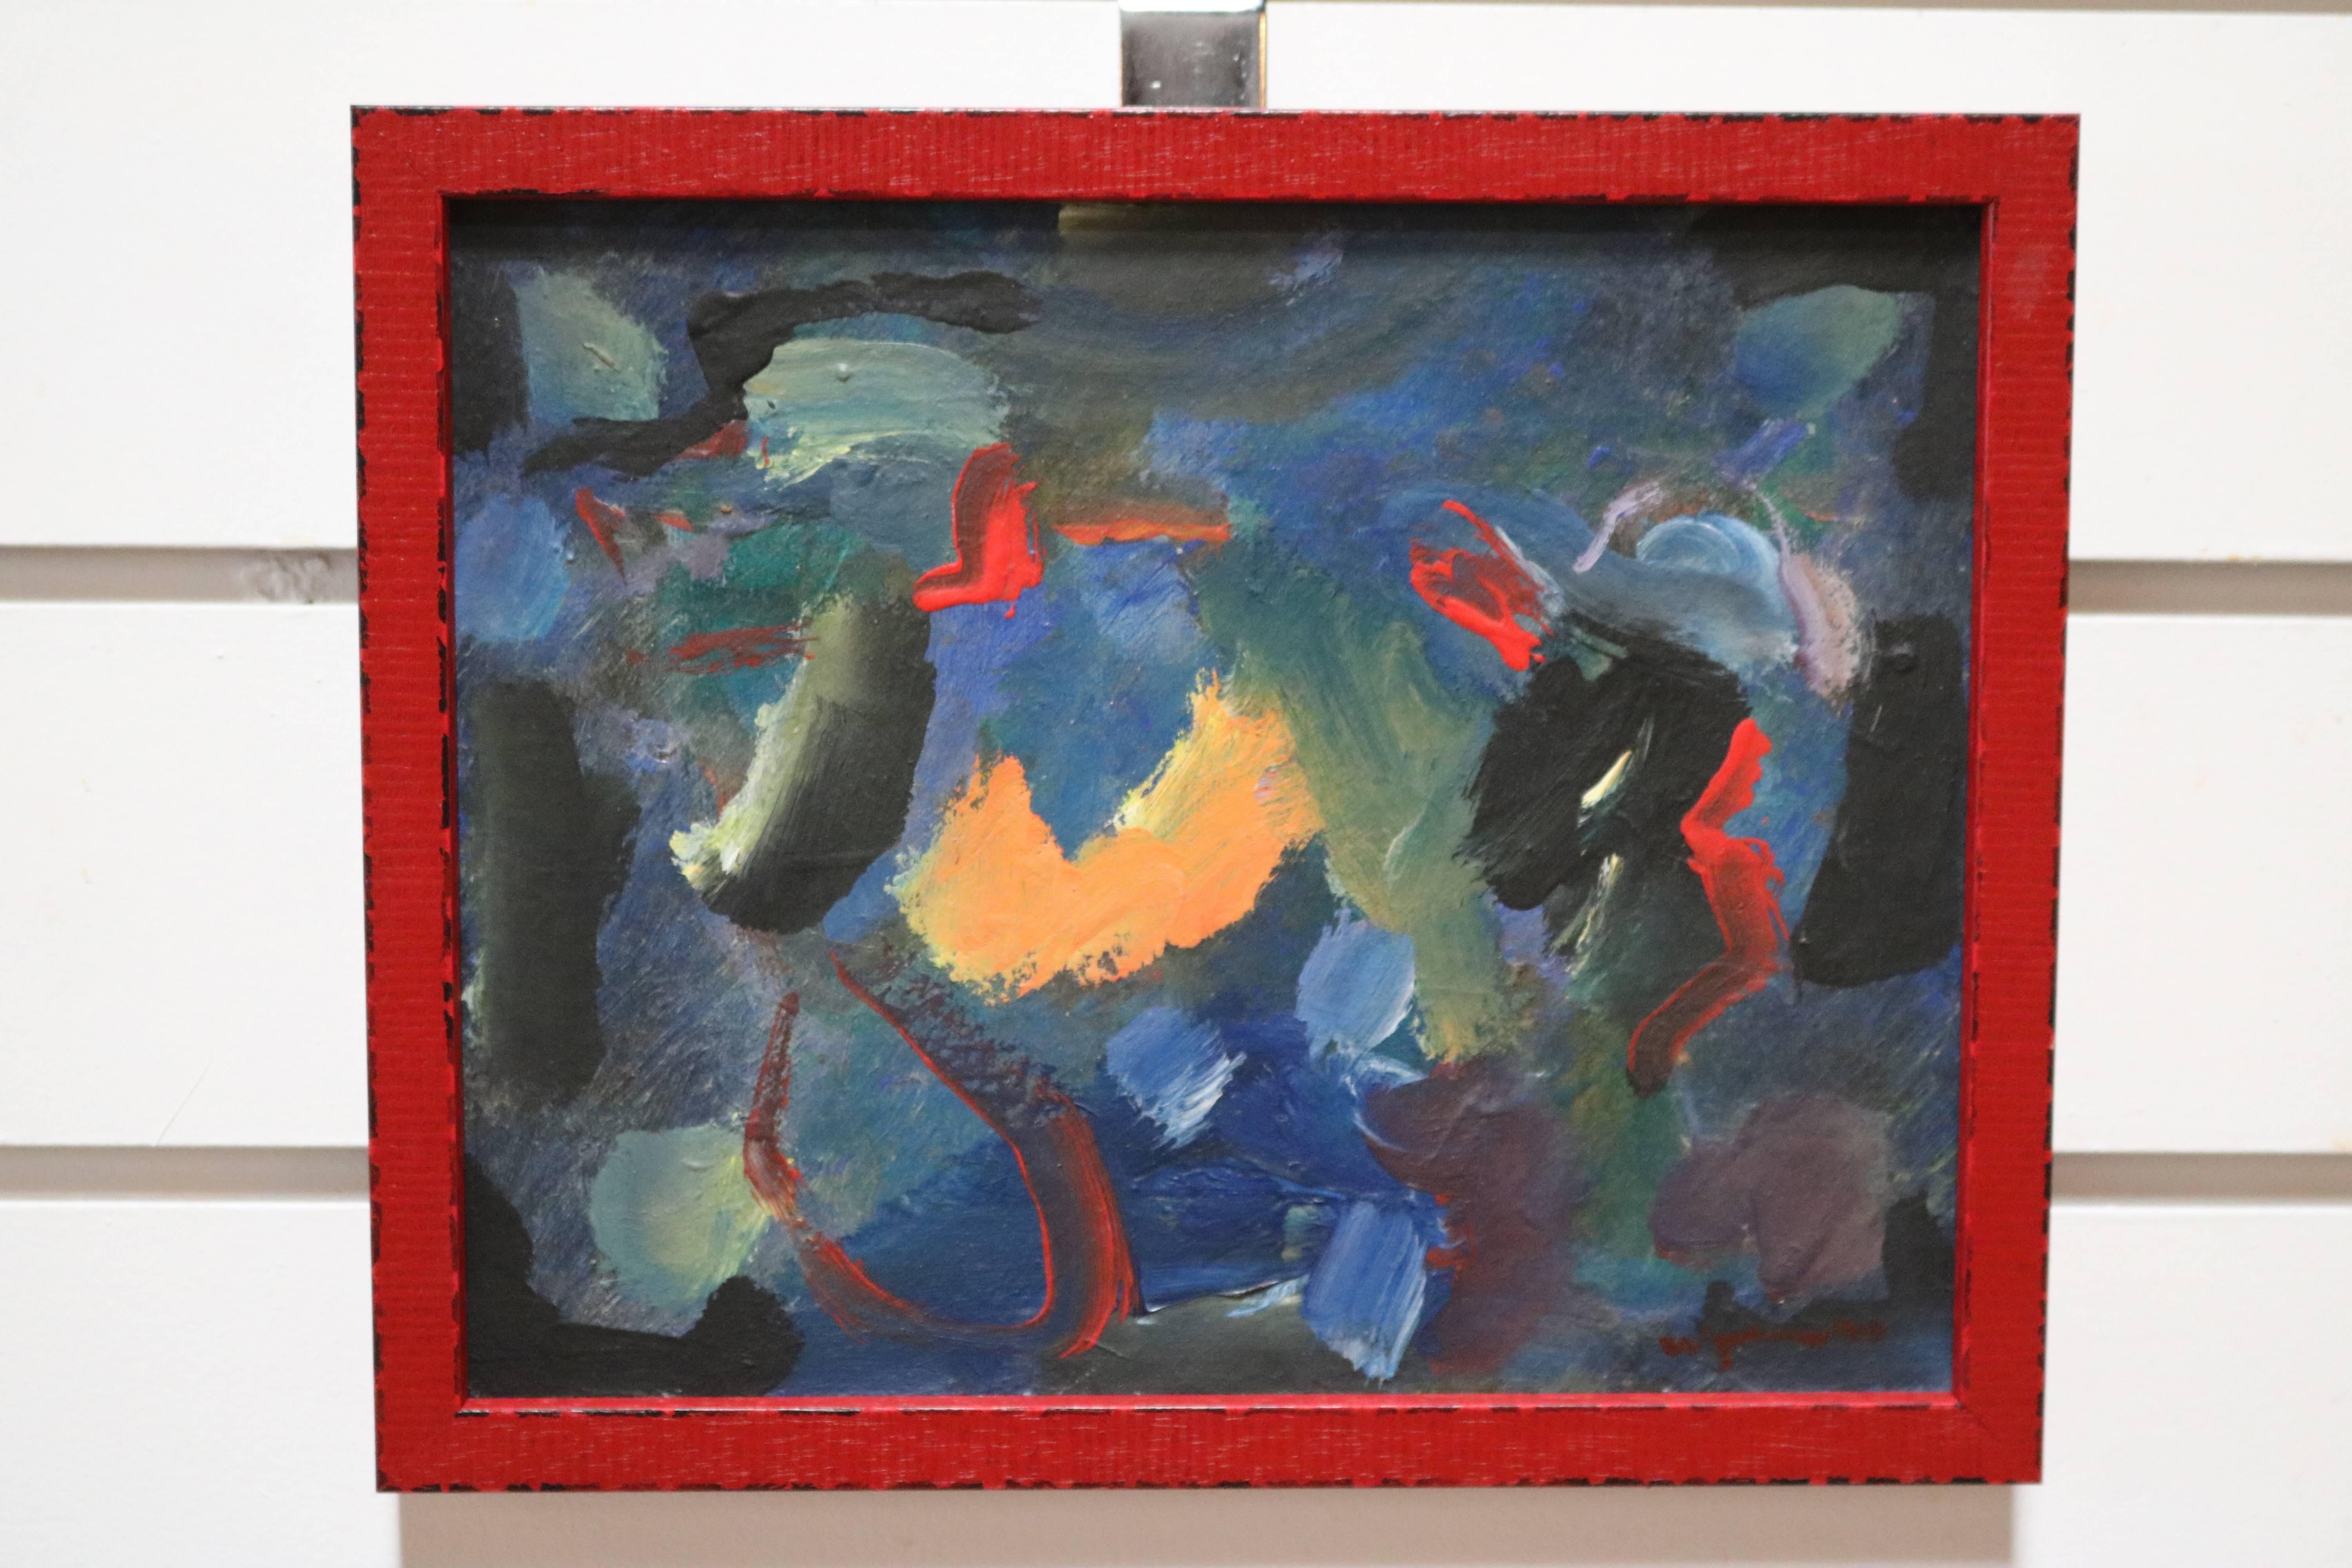 This little abstract painting has a wonderful contrast of lights and darks, abstract, yet never totally non-objective. Signed in right corner by artist Wesley Johnson.
